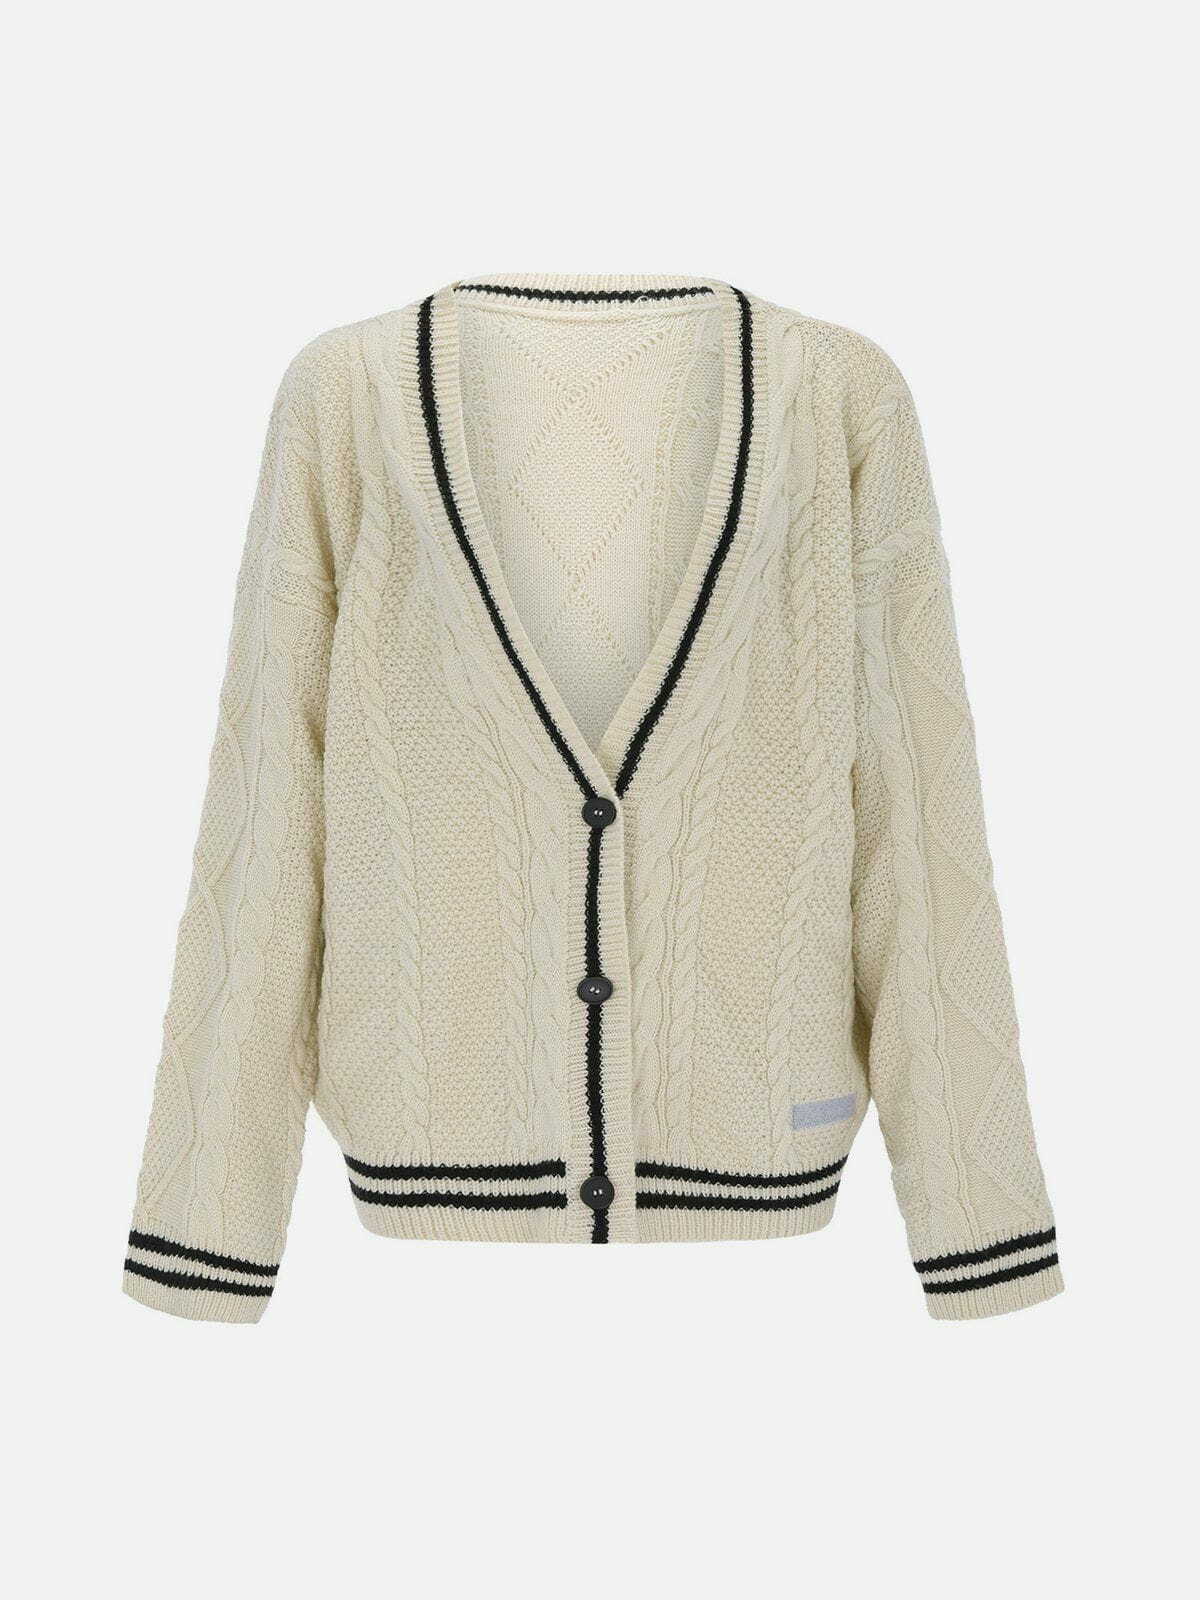 embroidered star cardigan edgy streetwear chic 1859